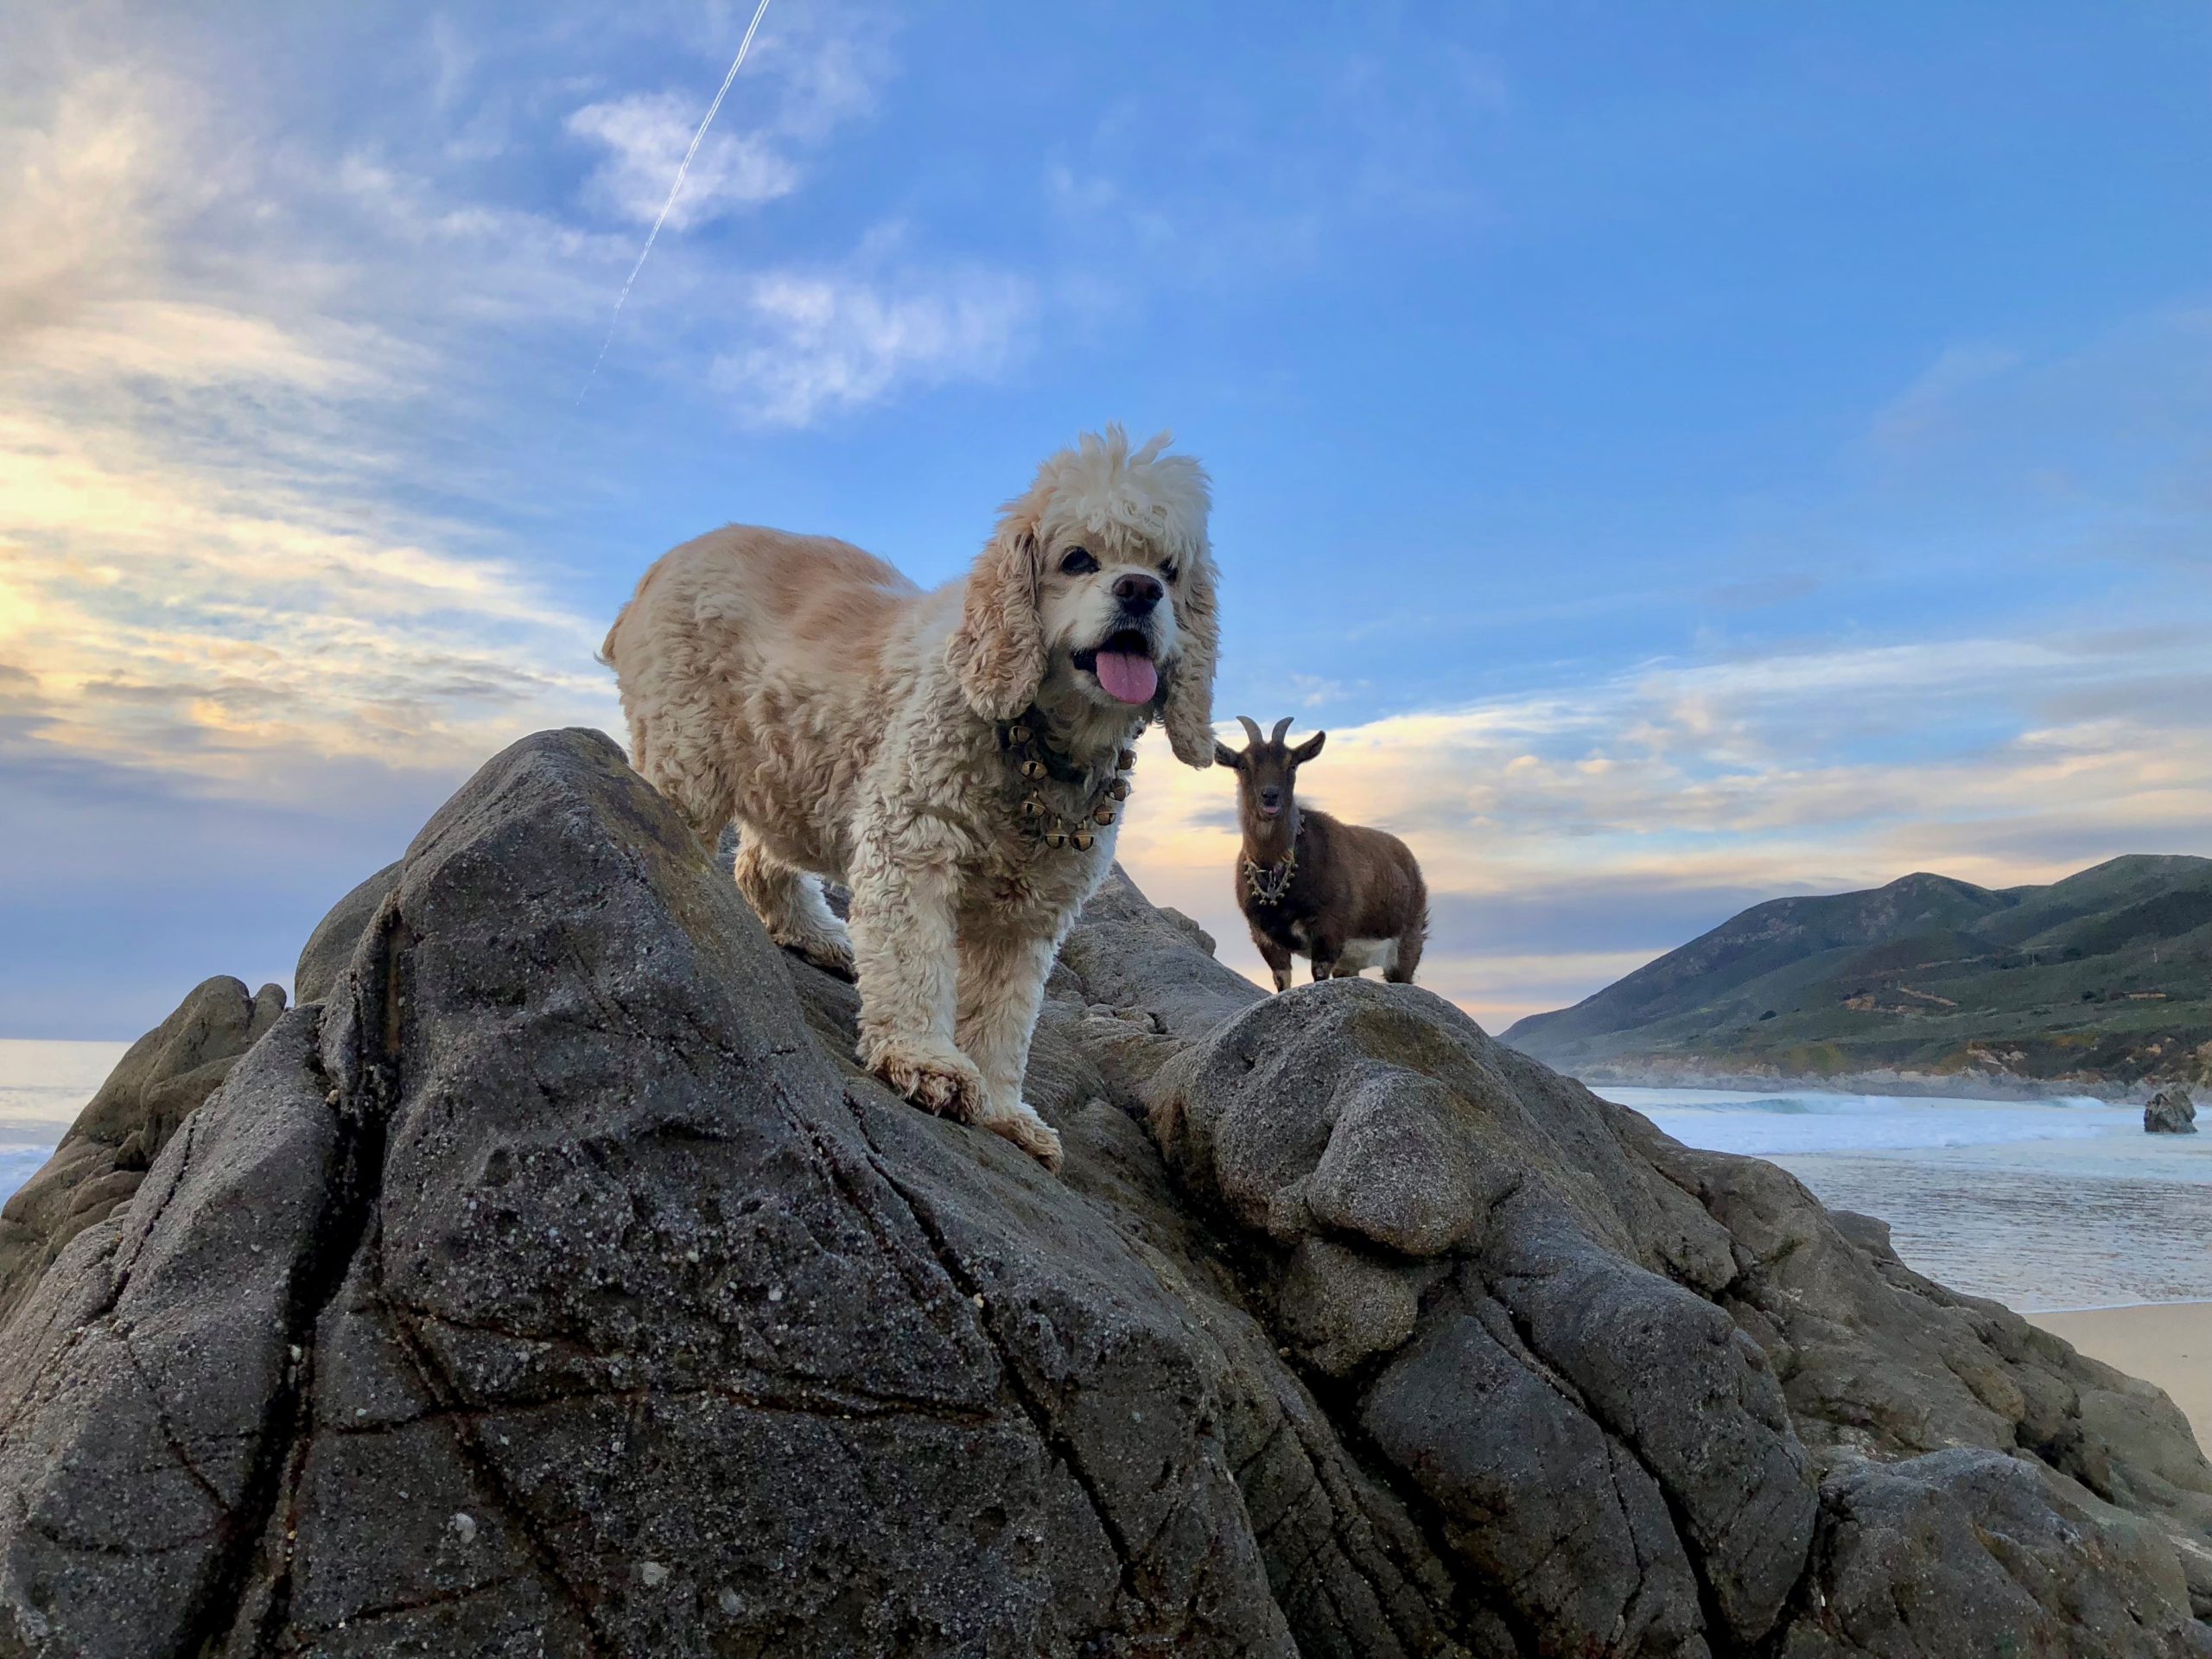 White dog and goat standing on rocky mountain